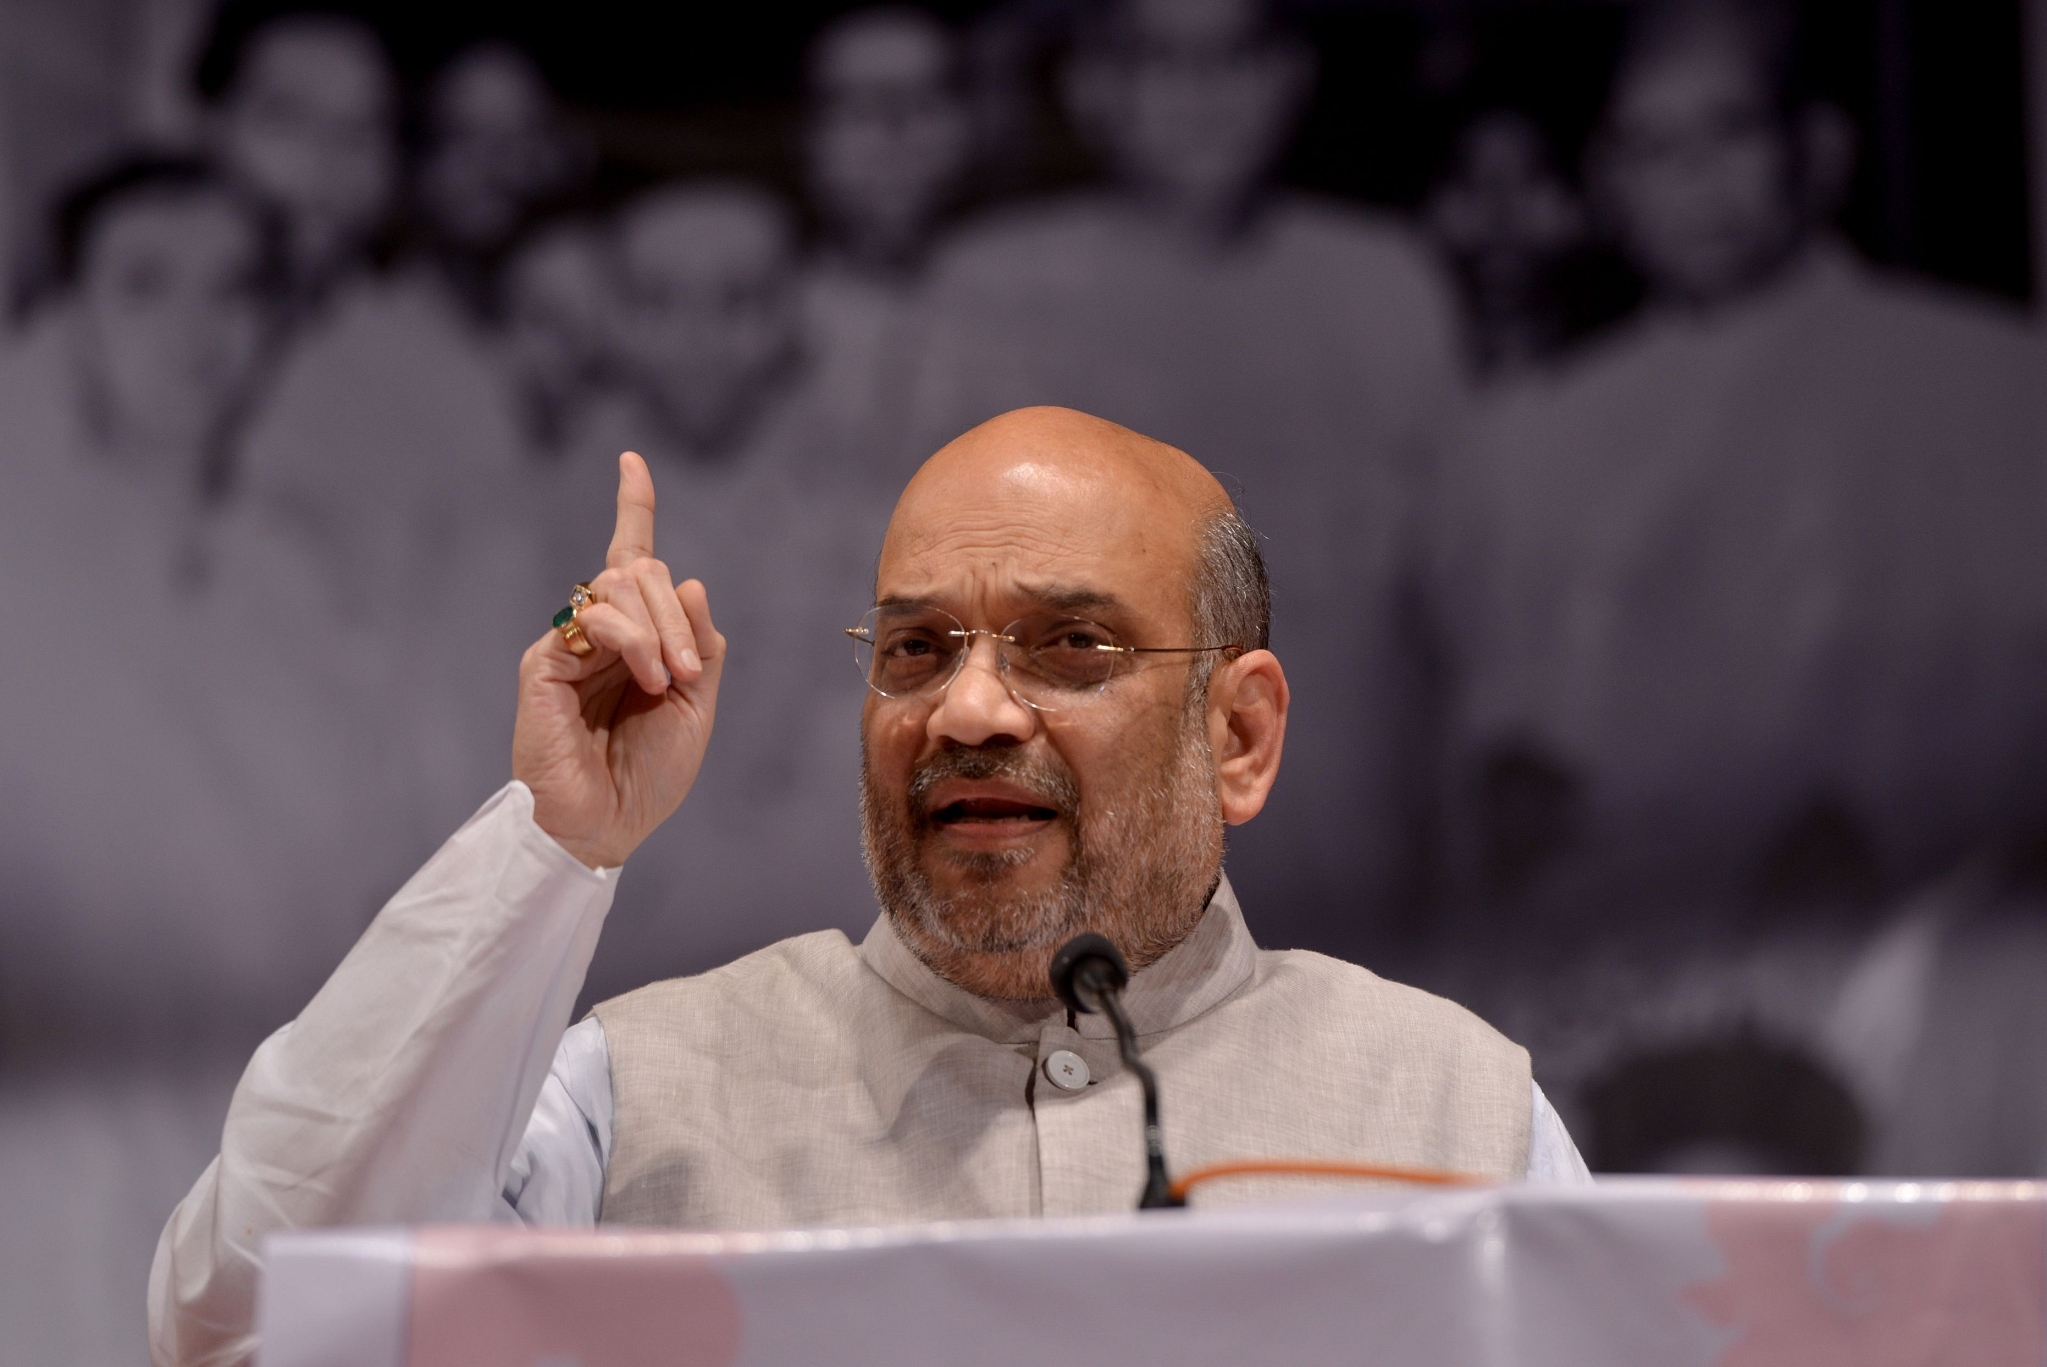 Amit Shah addressing party workers in West Bengal (File photo) (Photo by Milind Shelte/India Today Group/Getty Images)